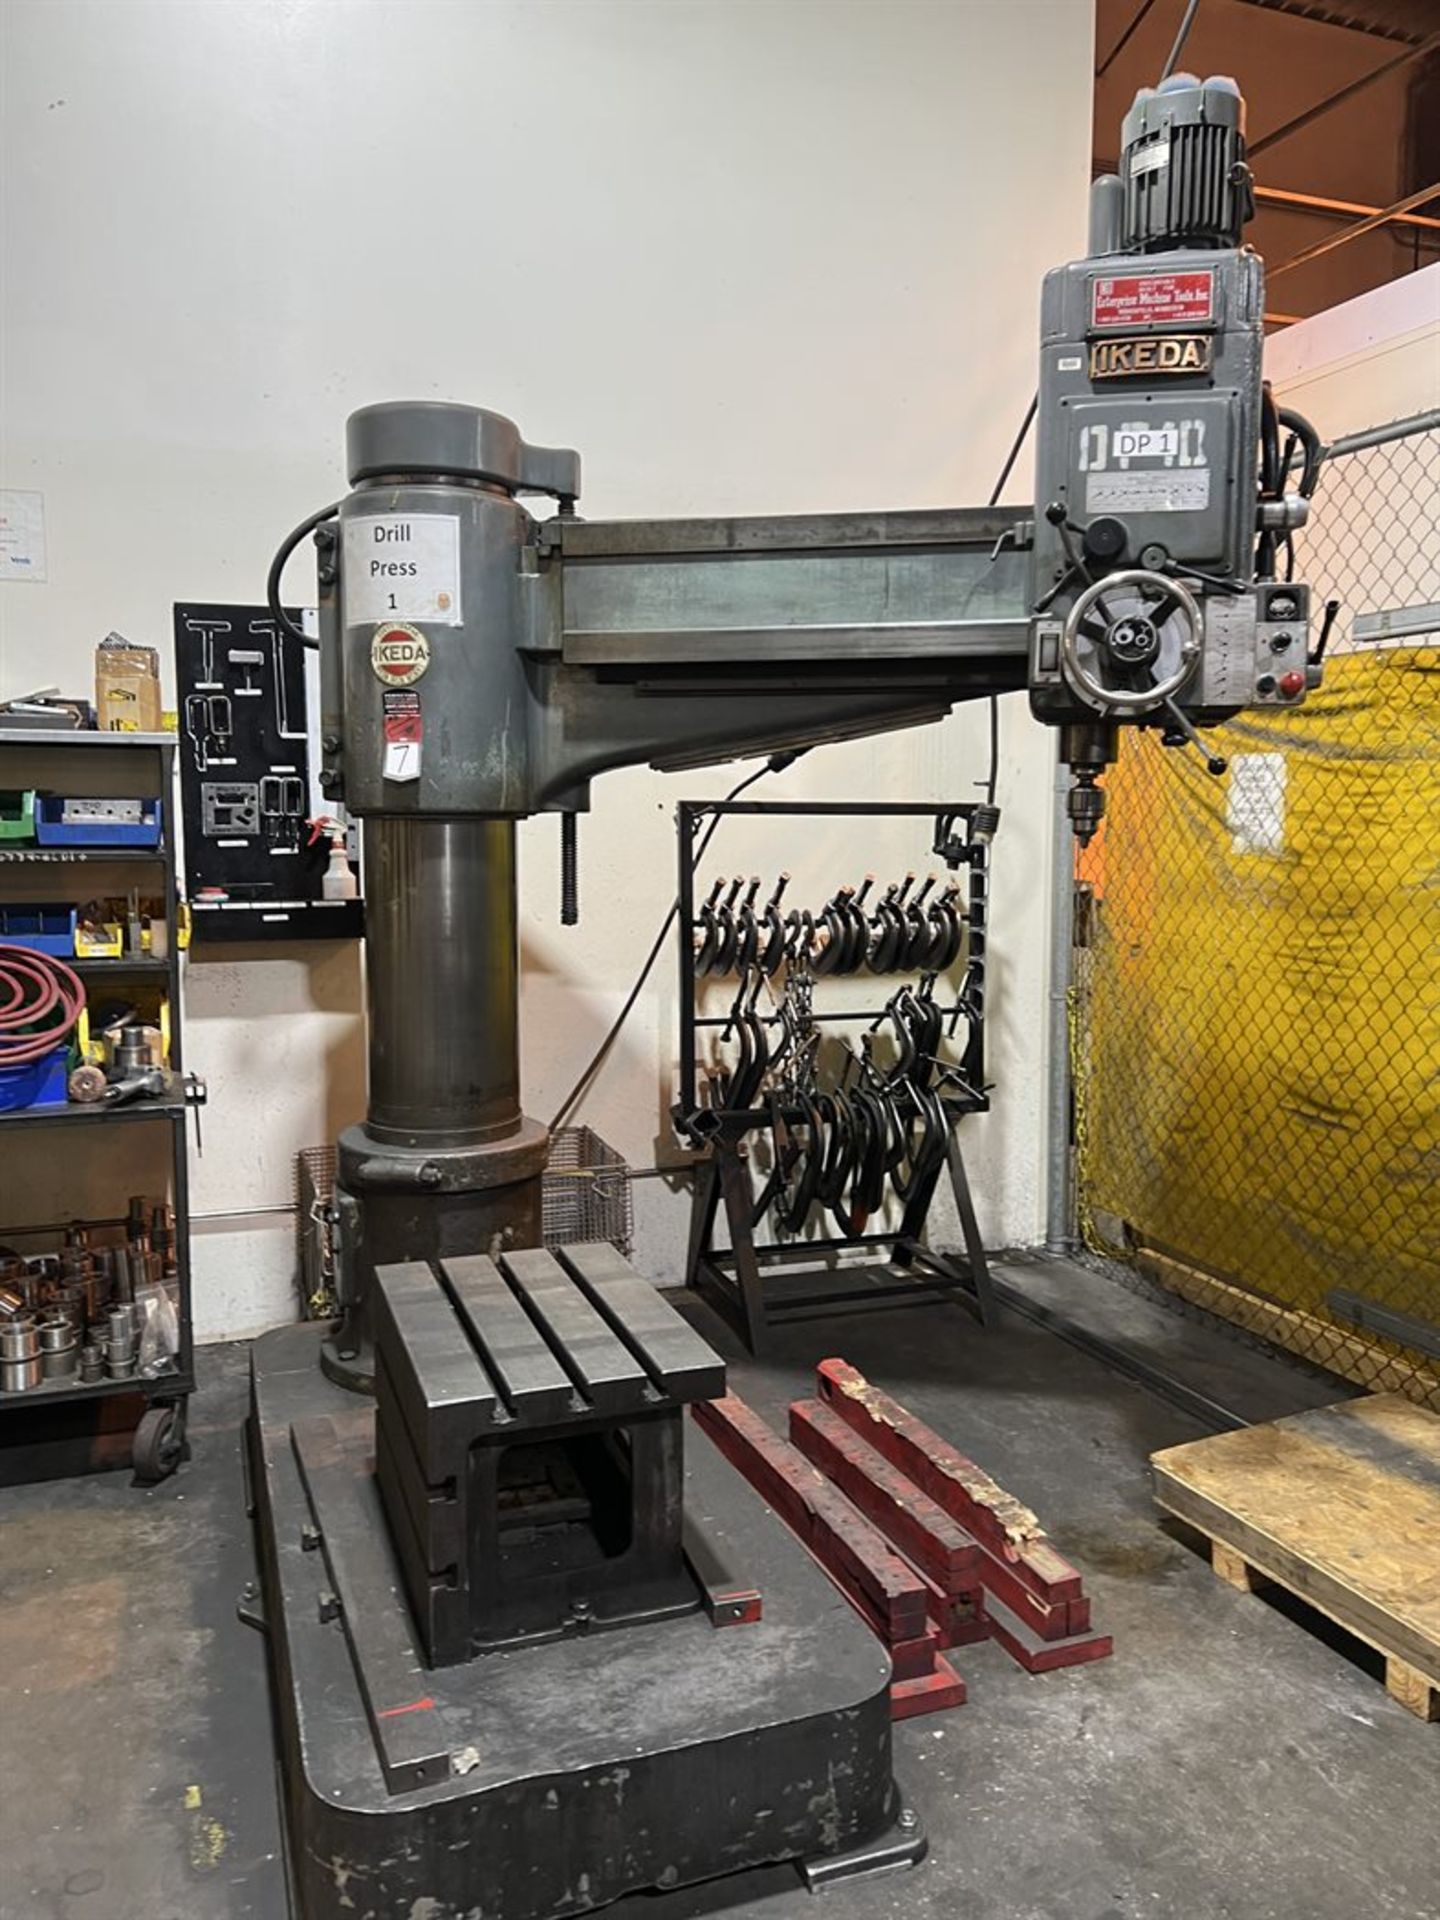 IKEDA RM-1775 4' x 12" Radial Arm Drill, s/n 83012, 1500 RPM, #3 MT, 9 HP, 26" x 18" x 16" Table - Image 8 of 8